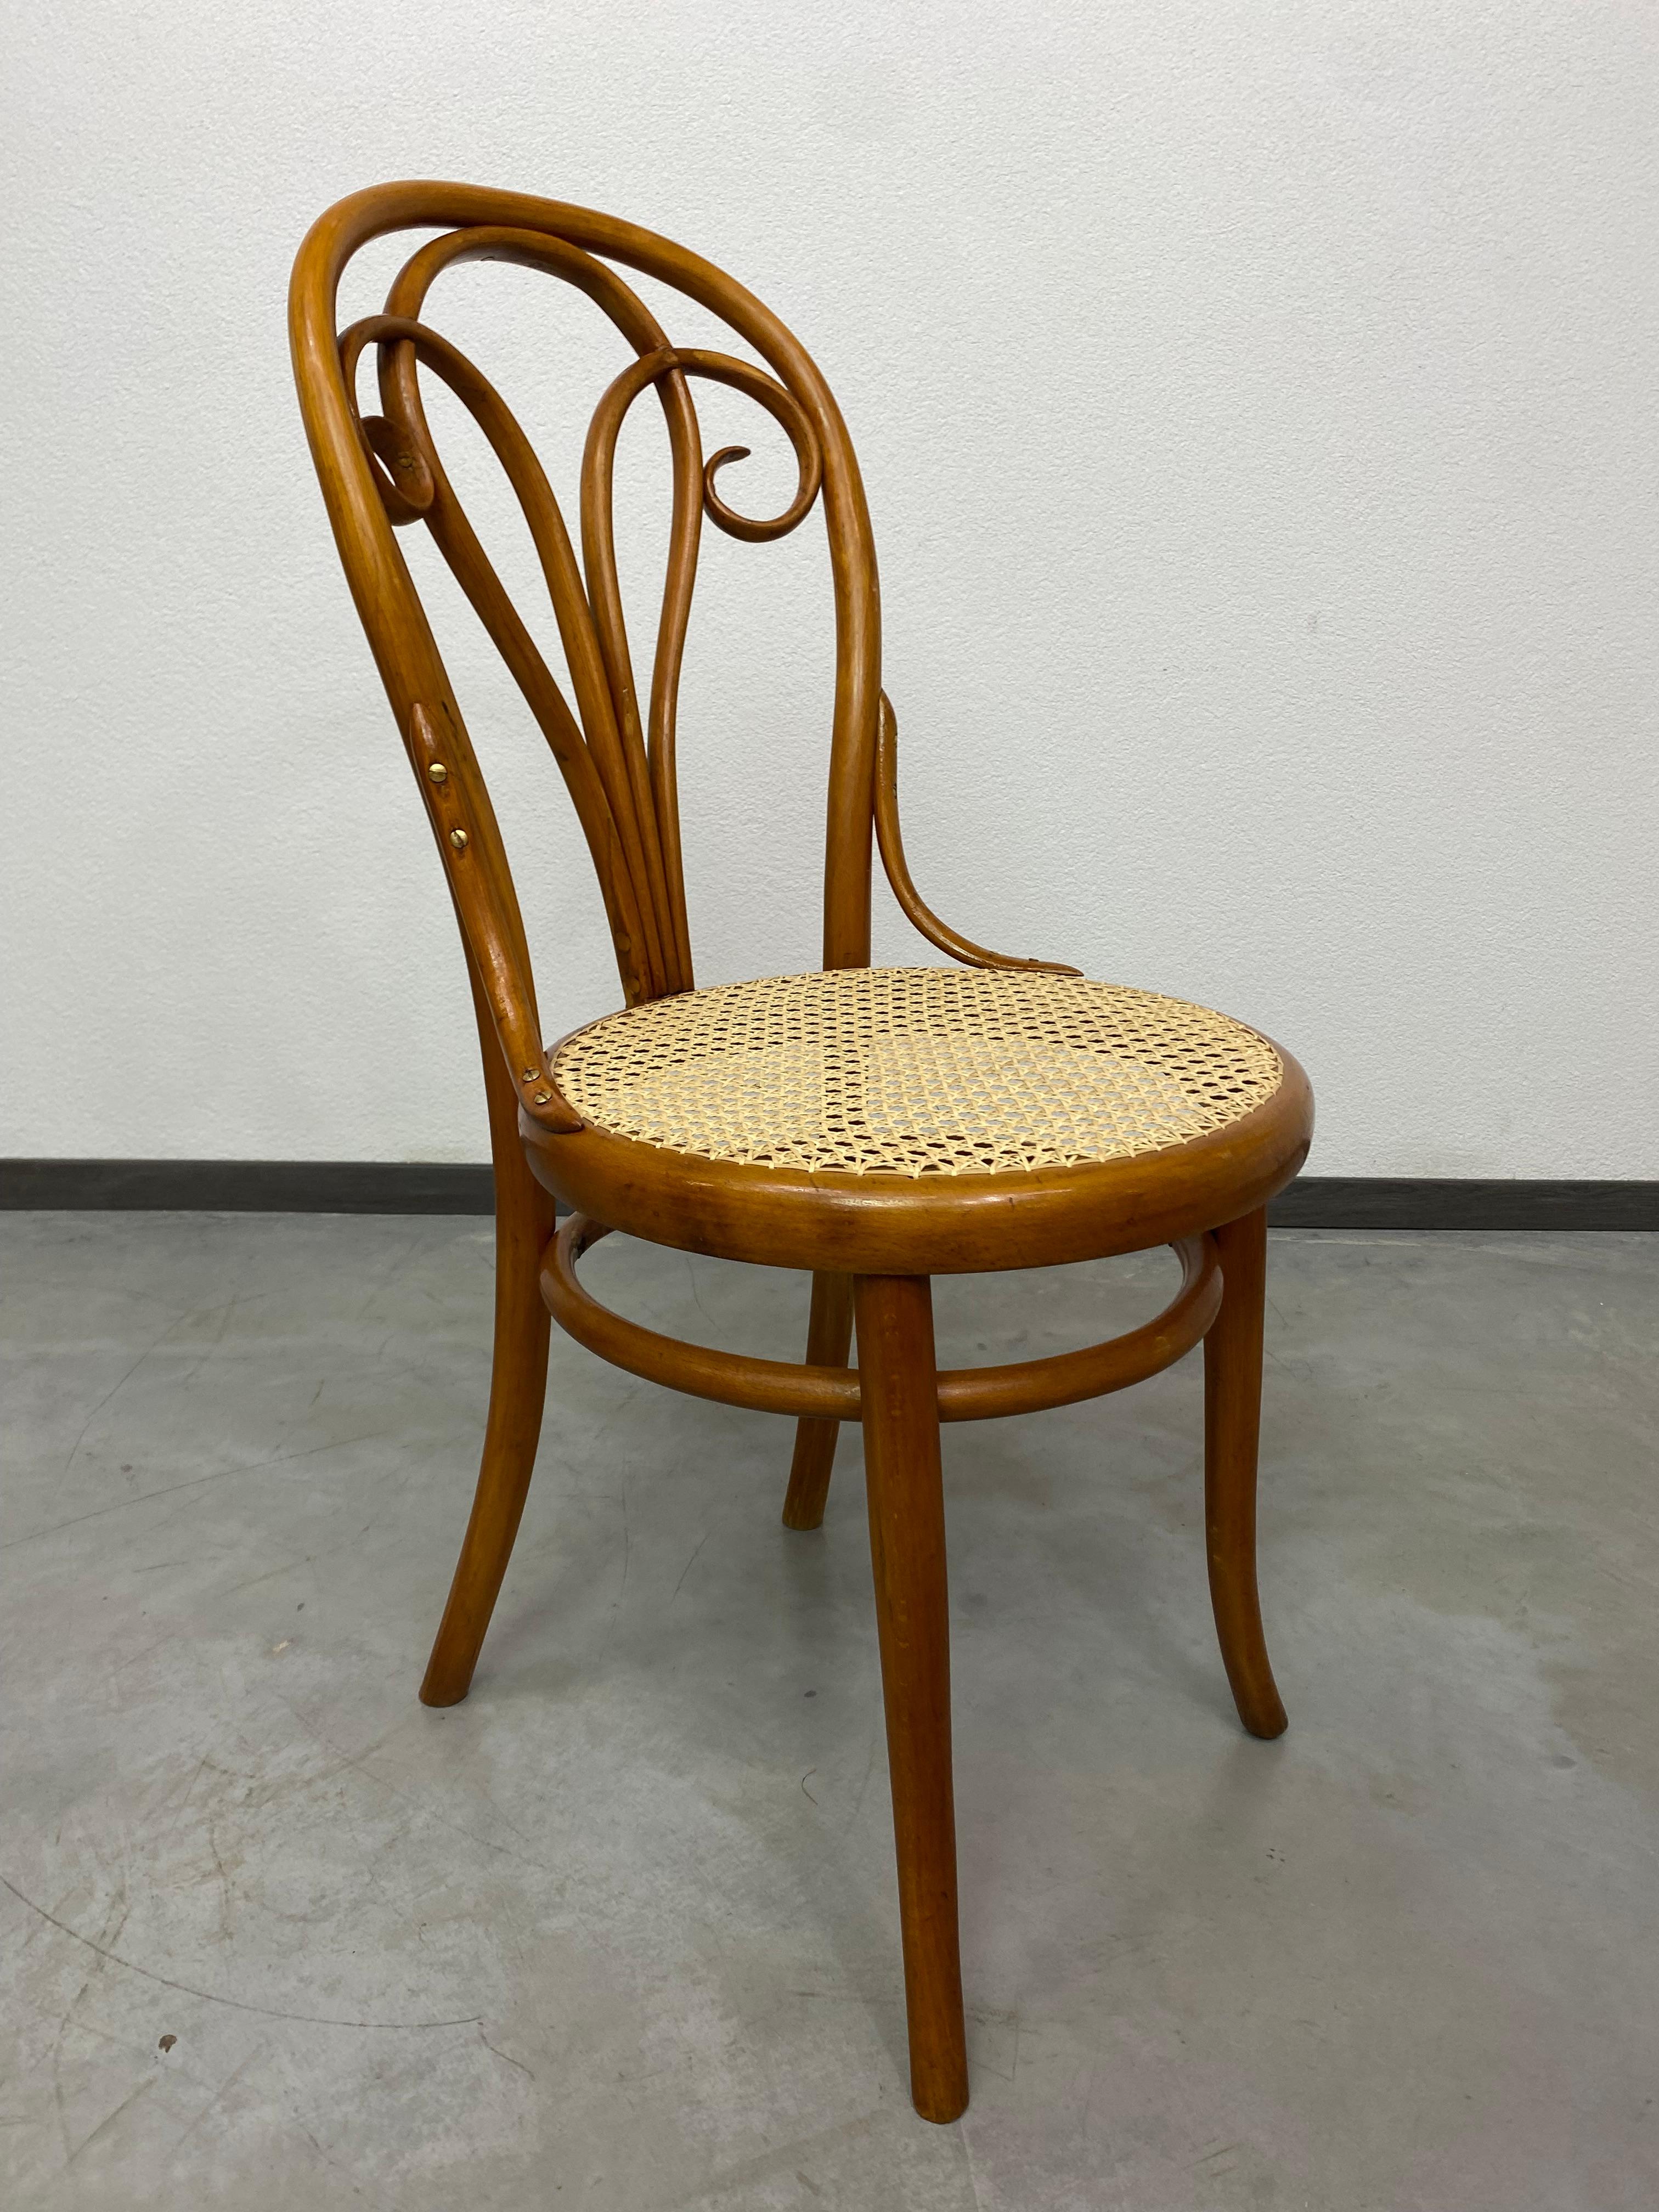 Bentwood dining chair by Löbl Wieisskirchen professionally stained and repolished.